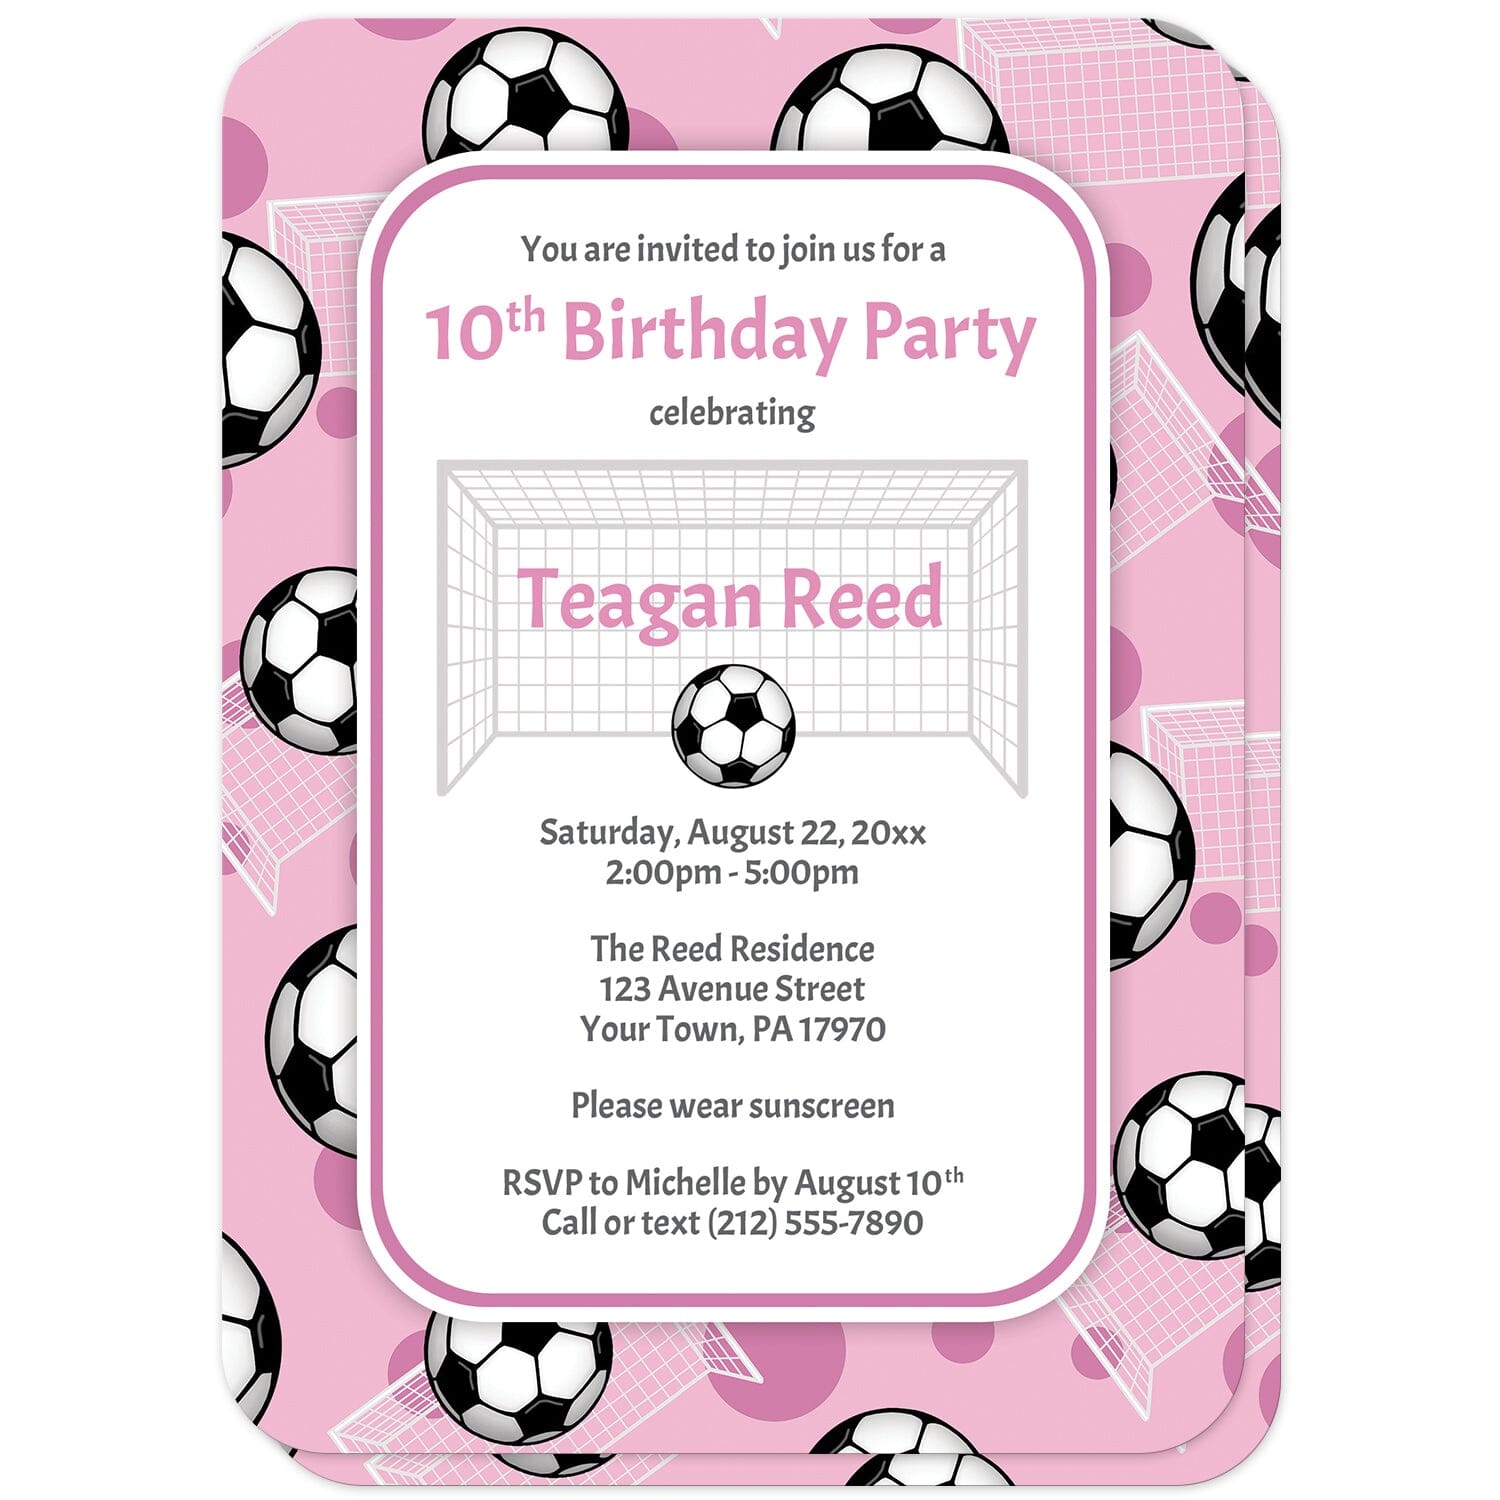 Soccer Ball and Goal Pink Birthday Party Invitations (with rounded corners) at Artistically Invited. Sports-themed soccer ball and goal pink birthday party invitations for any age or milestone that are uniquely illustrated with a pattern of soccer balls and soccer goals over a pink background color. Your personalized birthday party details are custom printed in pink and gray over white in the center over the soccer pattern.